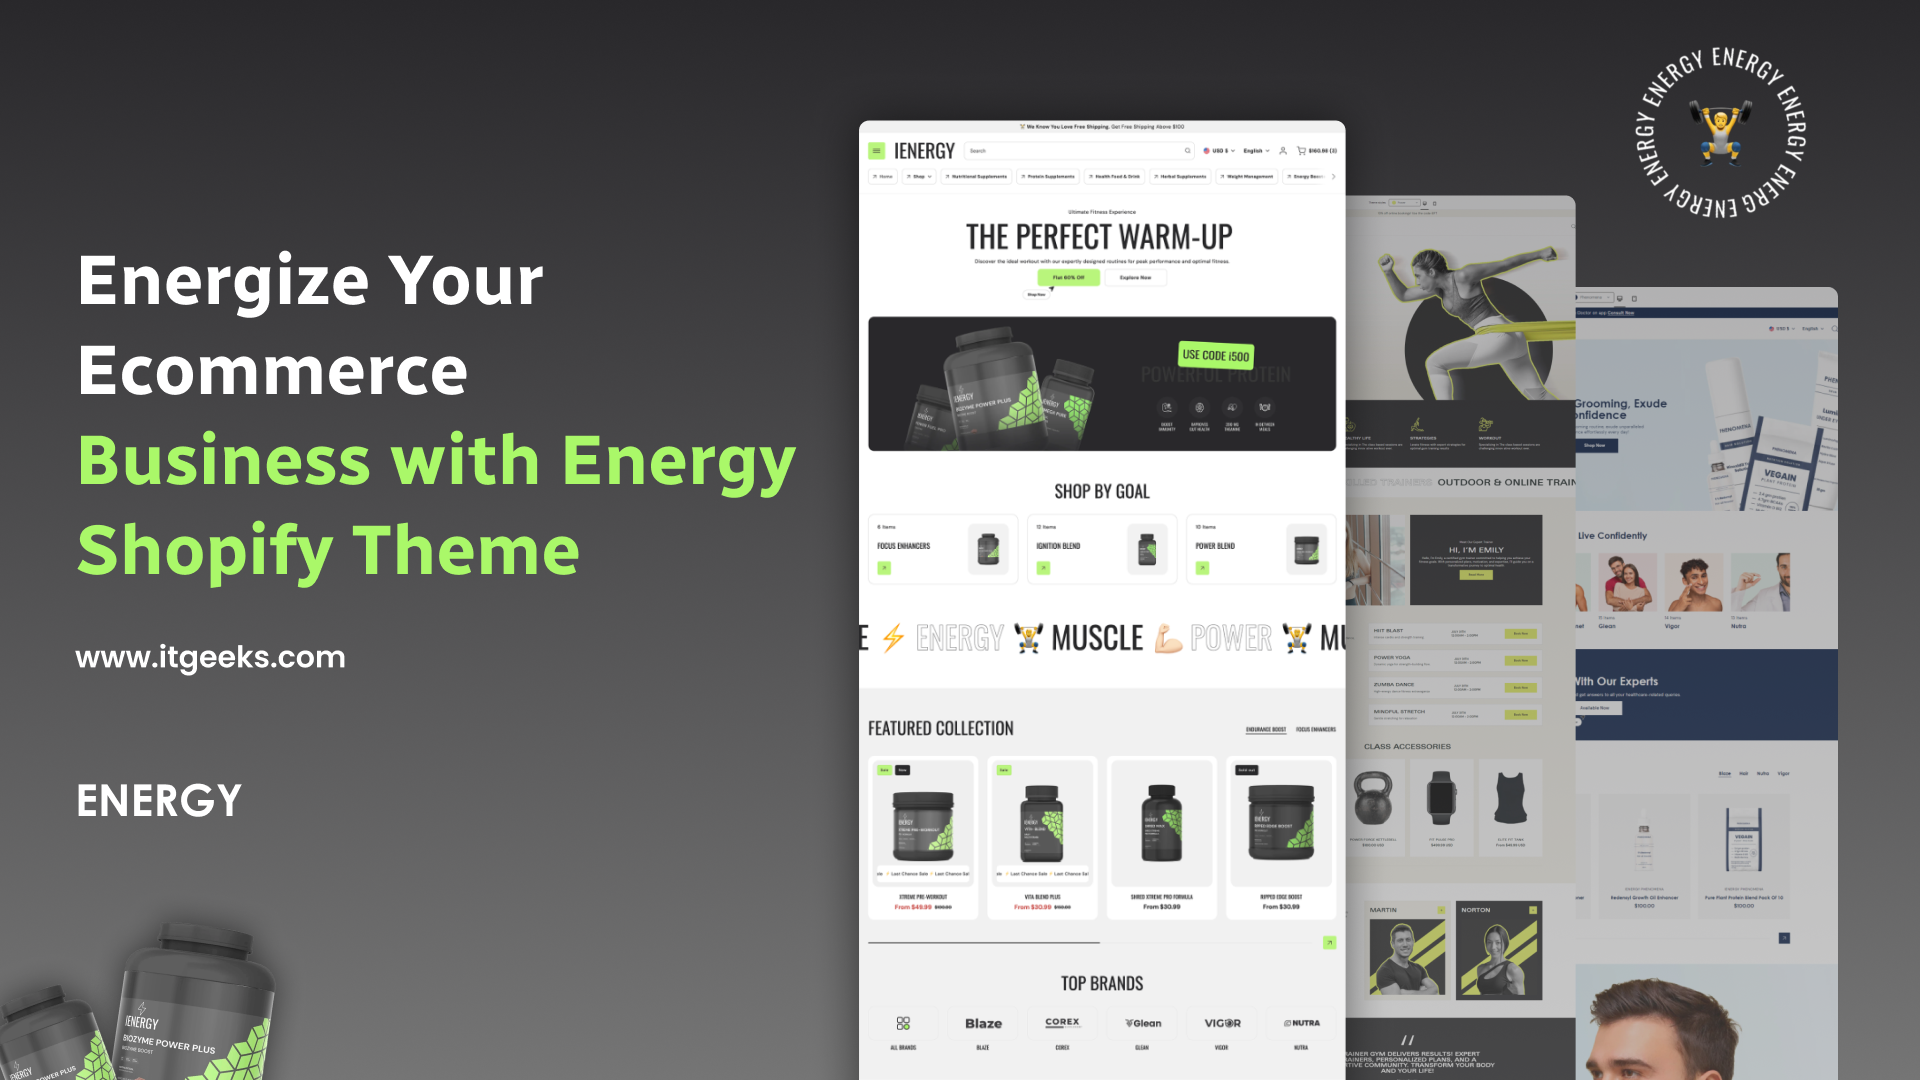 Energize Your Ecommerce Business with Energy Shopify Theme